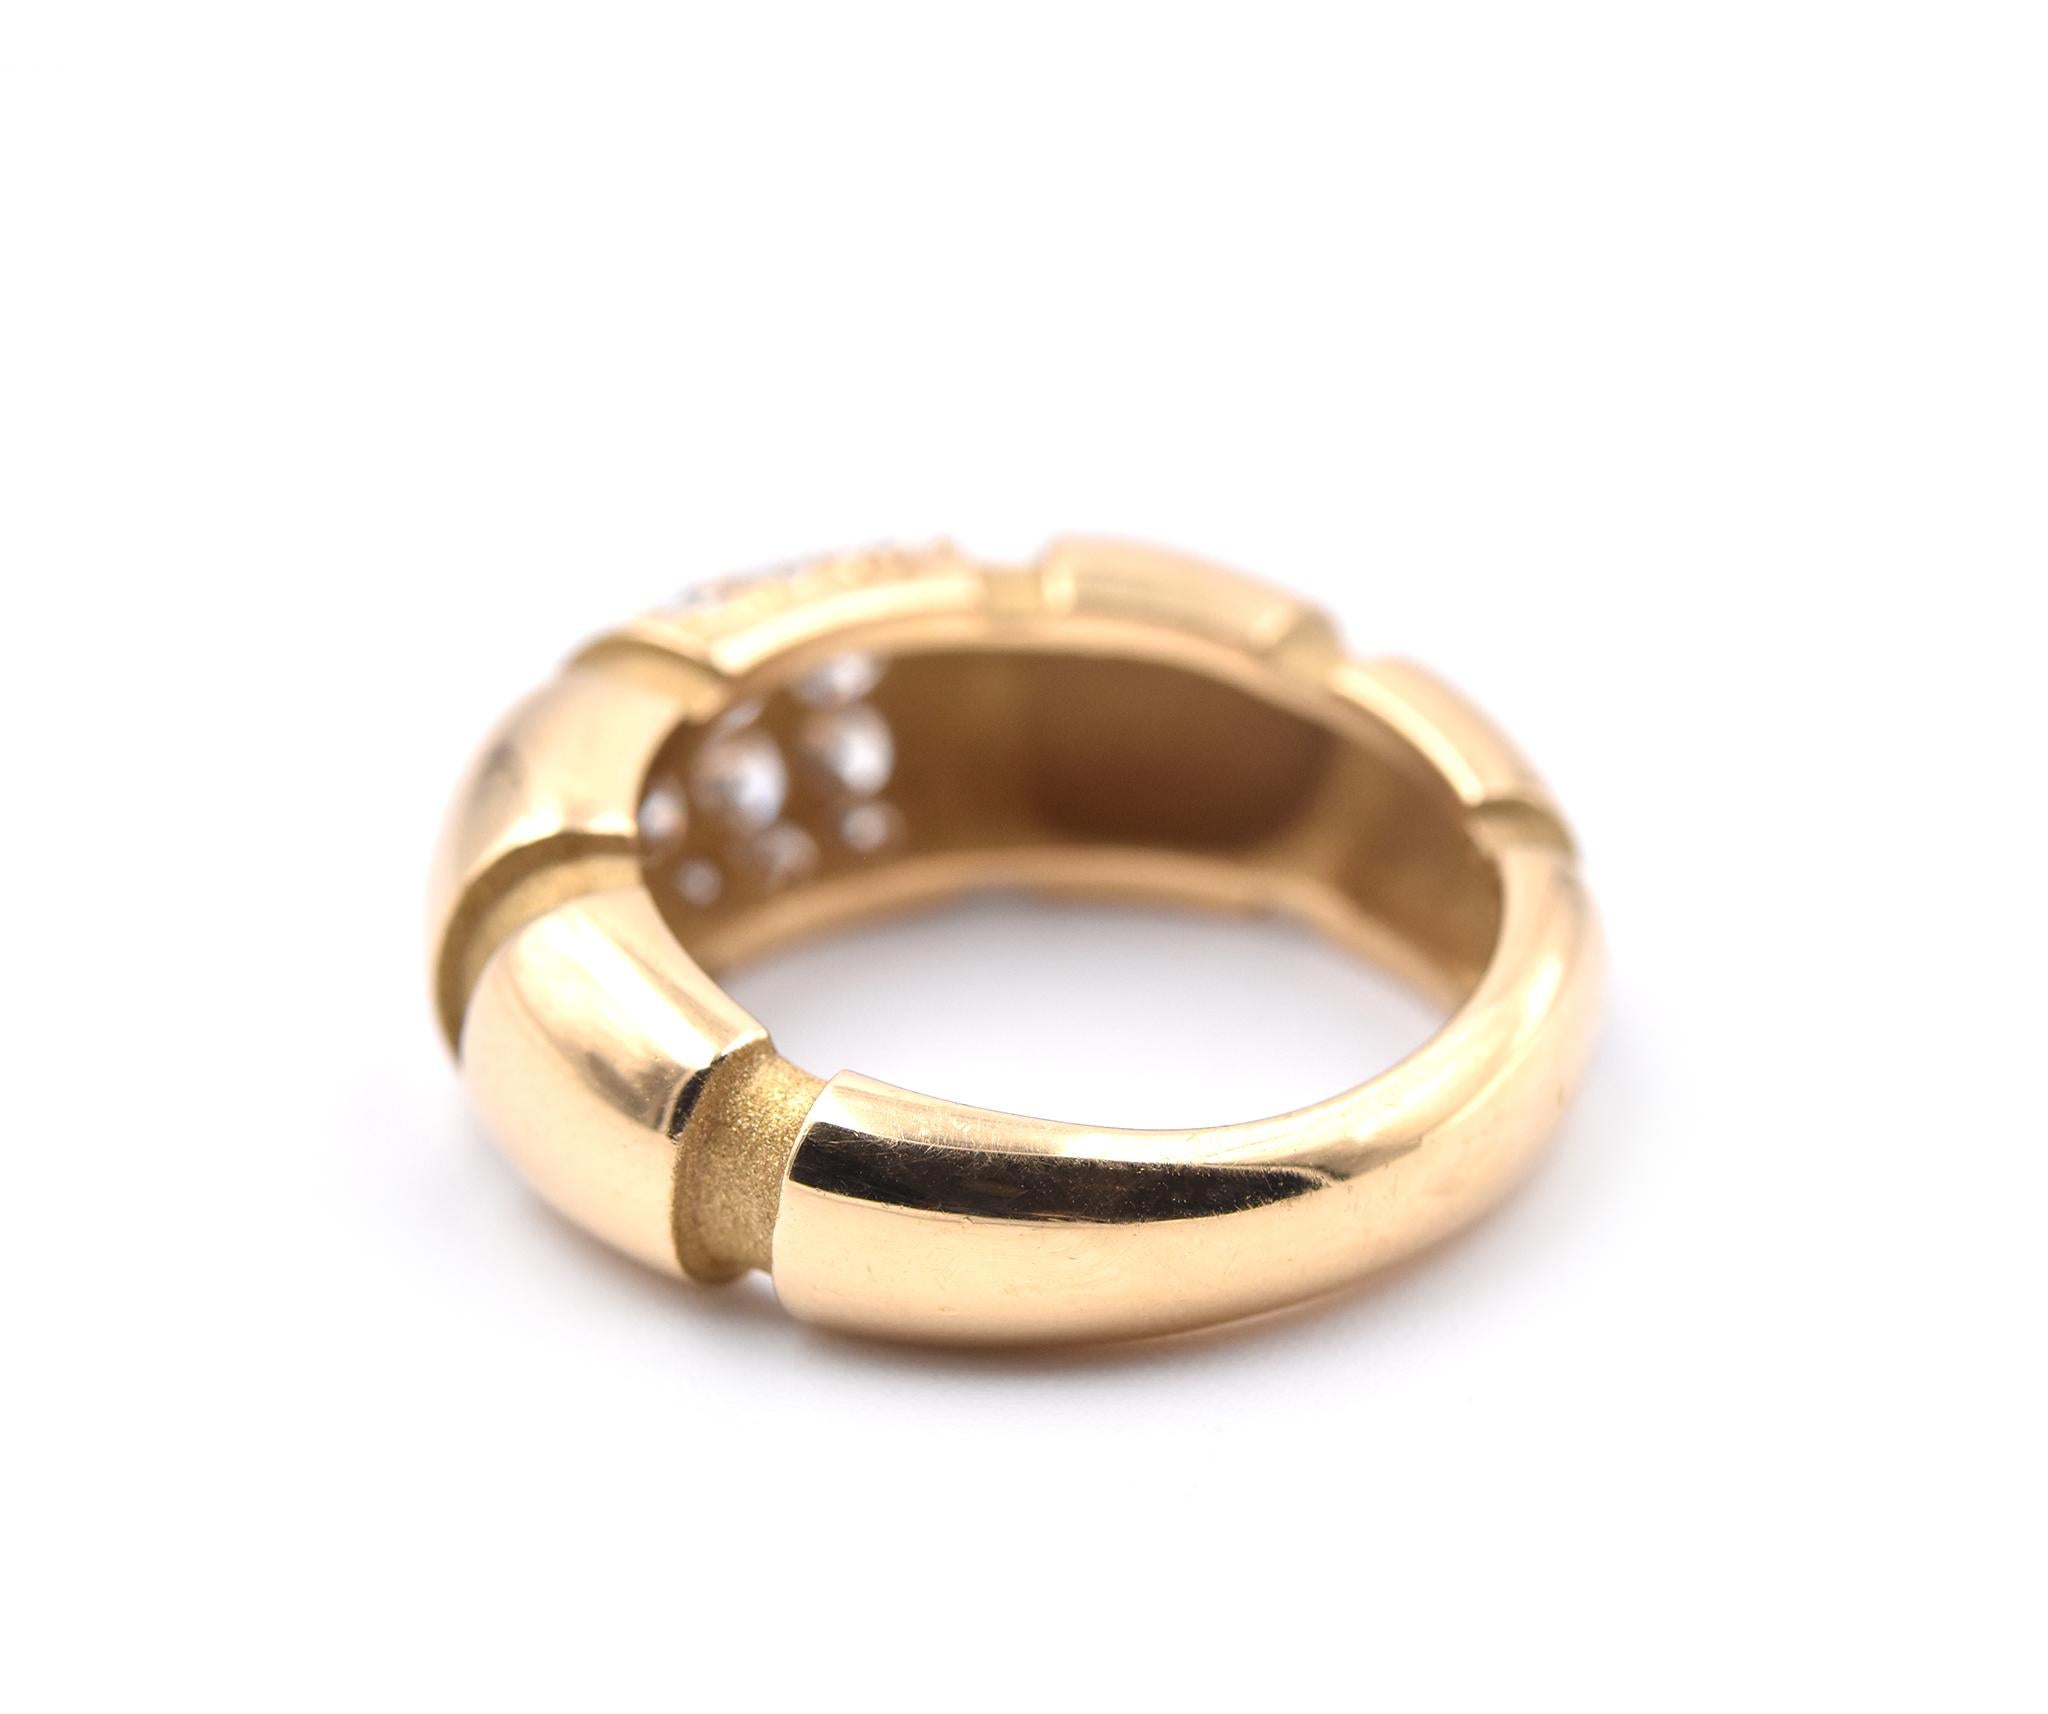 Mauboussin 18 Karat Yellow Gold Diamond Band In Excellent Condition For Sale In Scottsdale, AZ